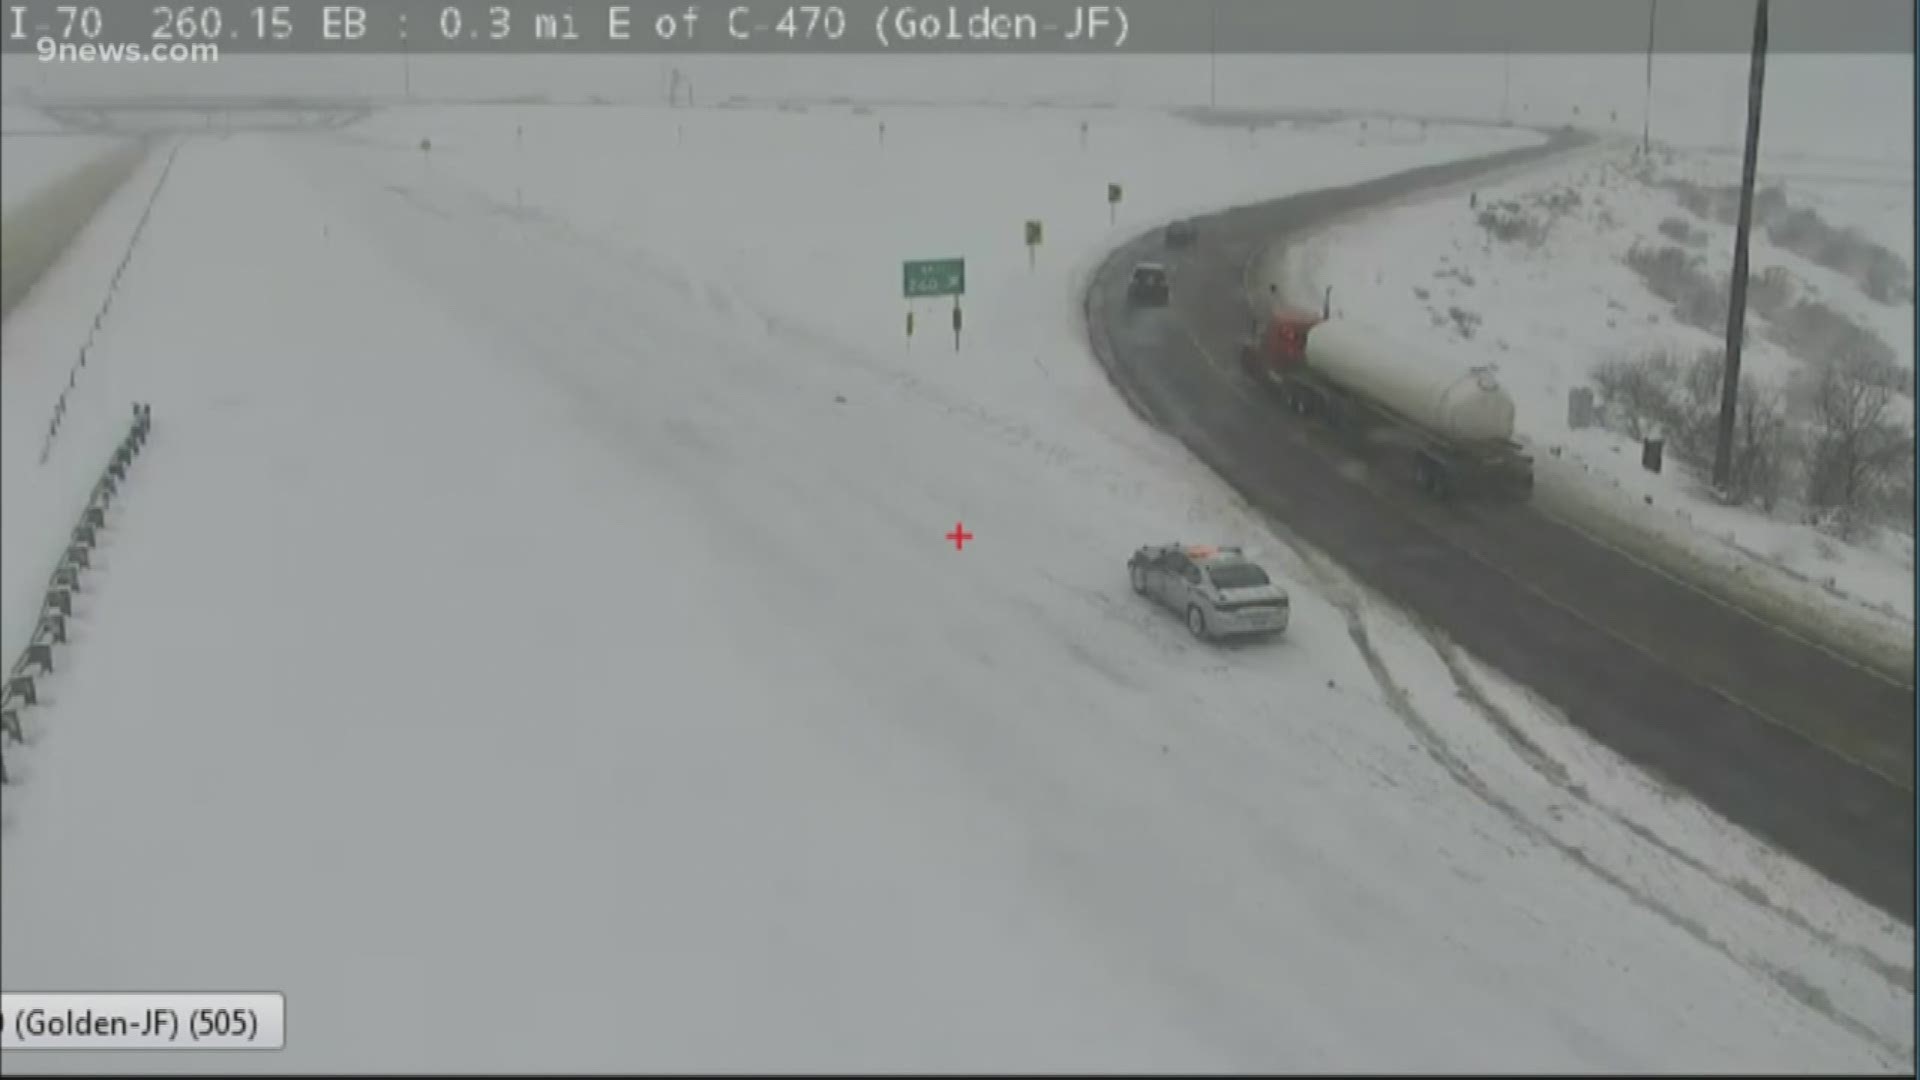 Heavy snow and low visibility lead CDOT to shut down the westbound lanes of I-70 from Golden to the Eisenhower Tunnel.